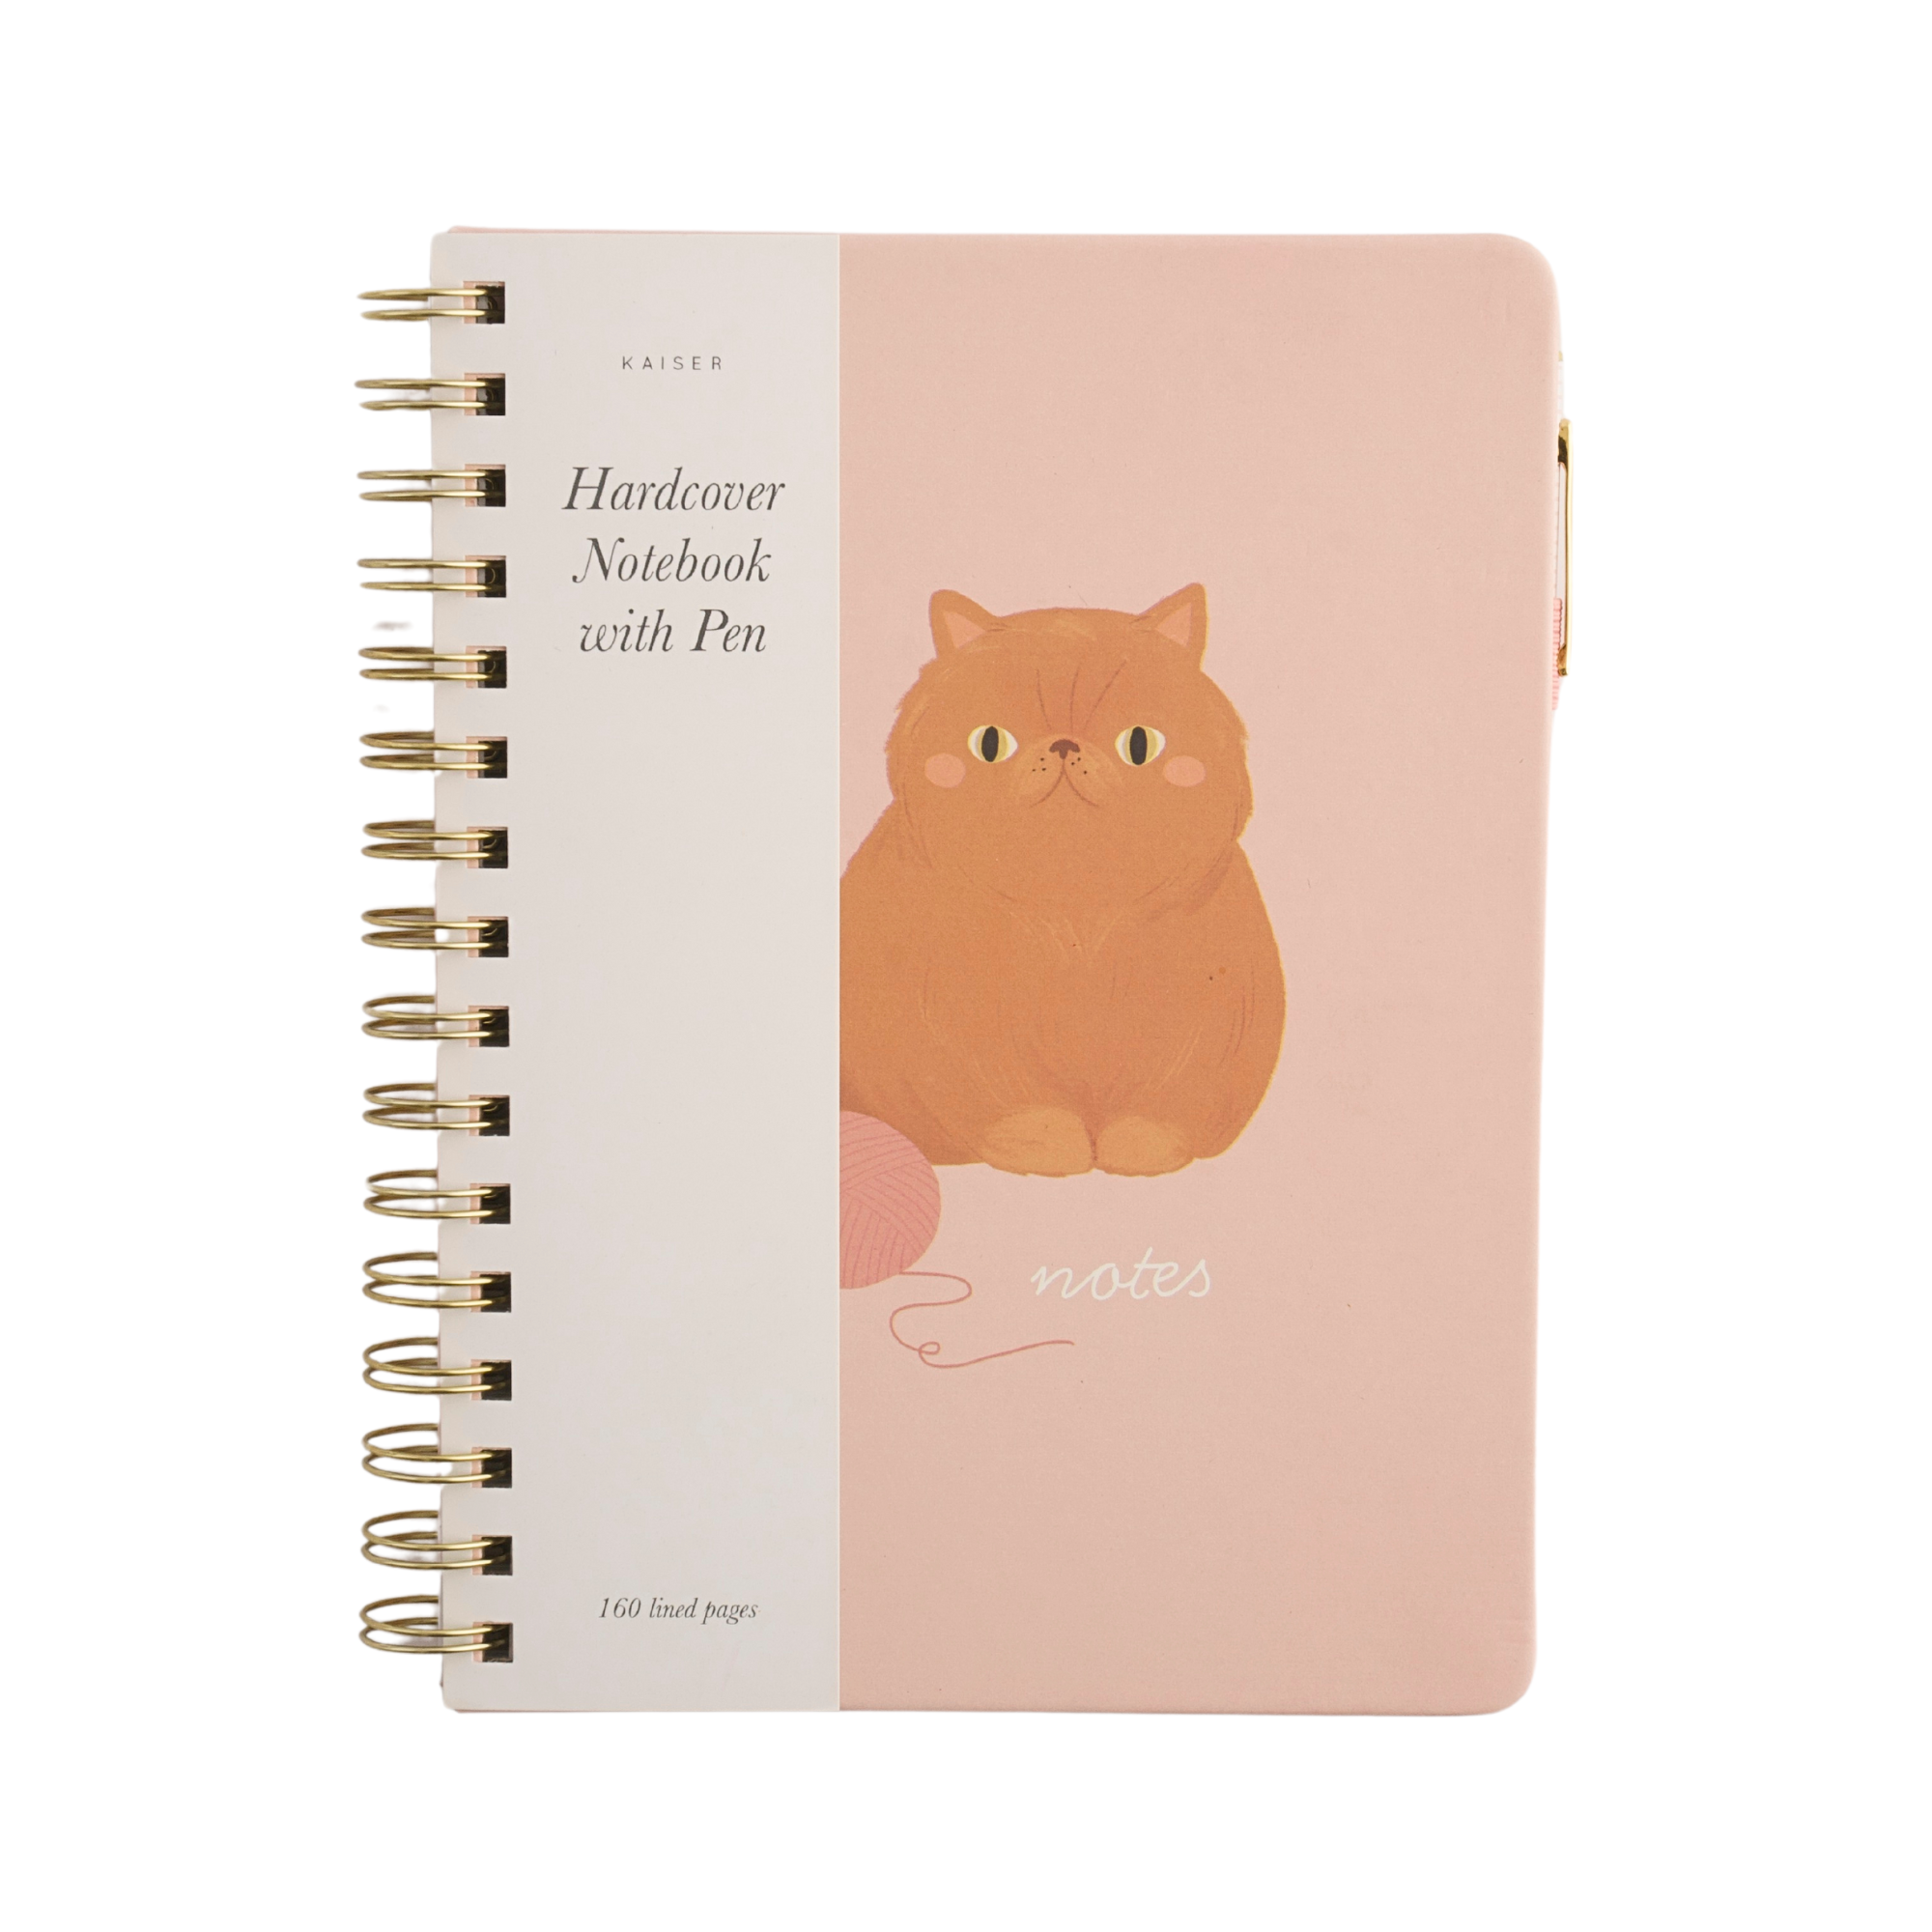 Hardcover Notebook With Pen - Cute Cat